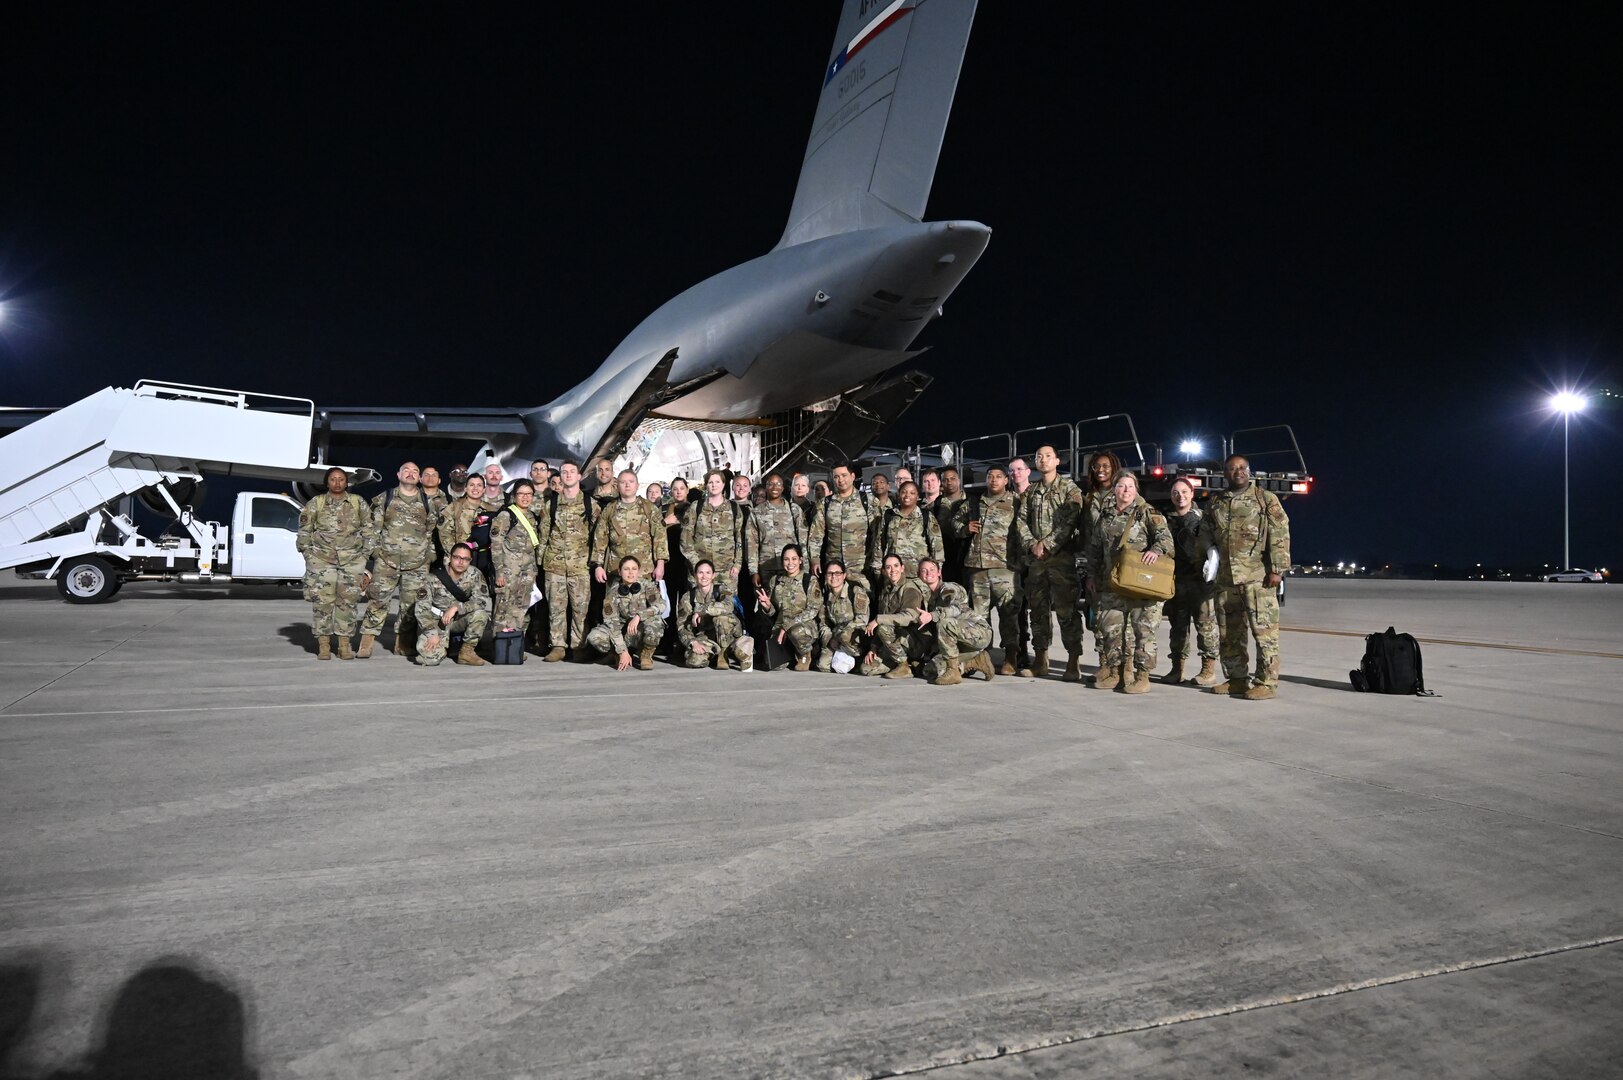 433rd Medical Squadron Airmen who participated in Patriot Medic 23 pose for a unit photo following their return to JBSA-Lackland on Aug. 29, 2023.